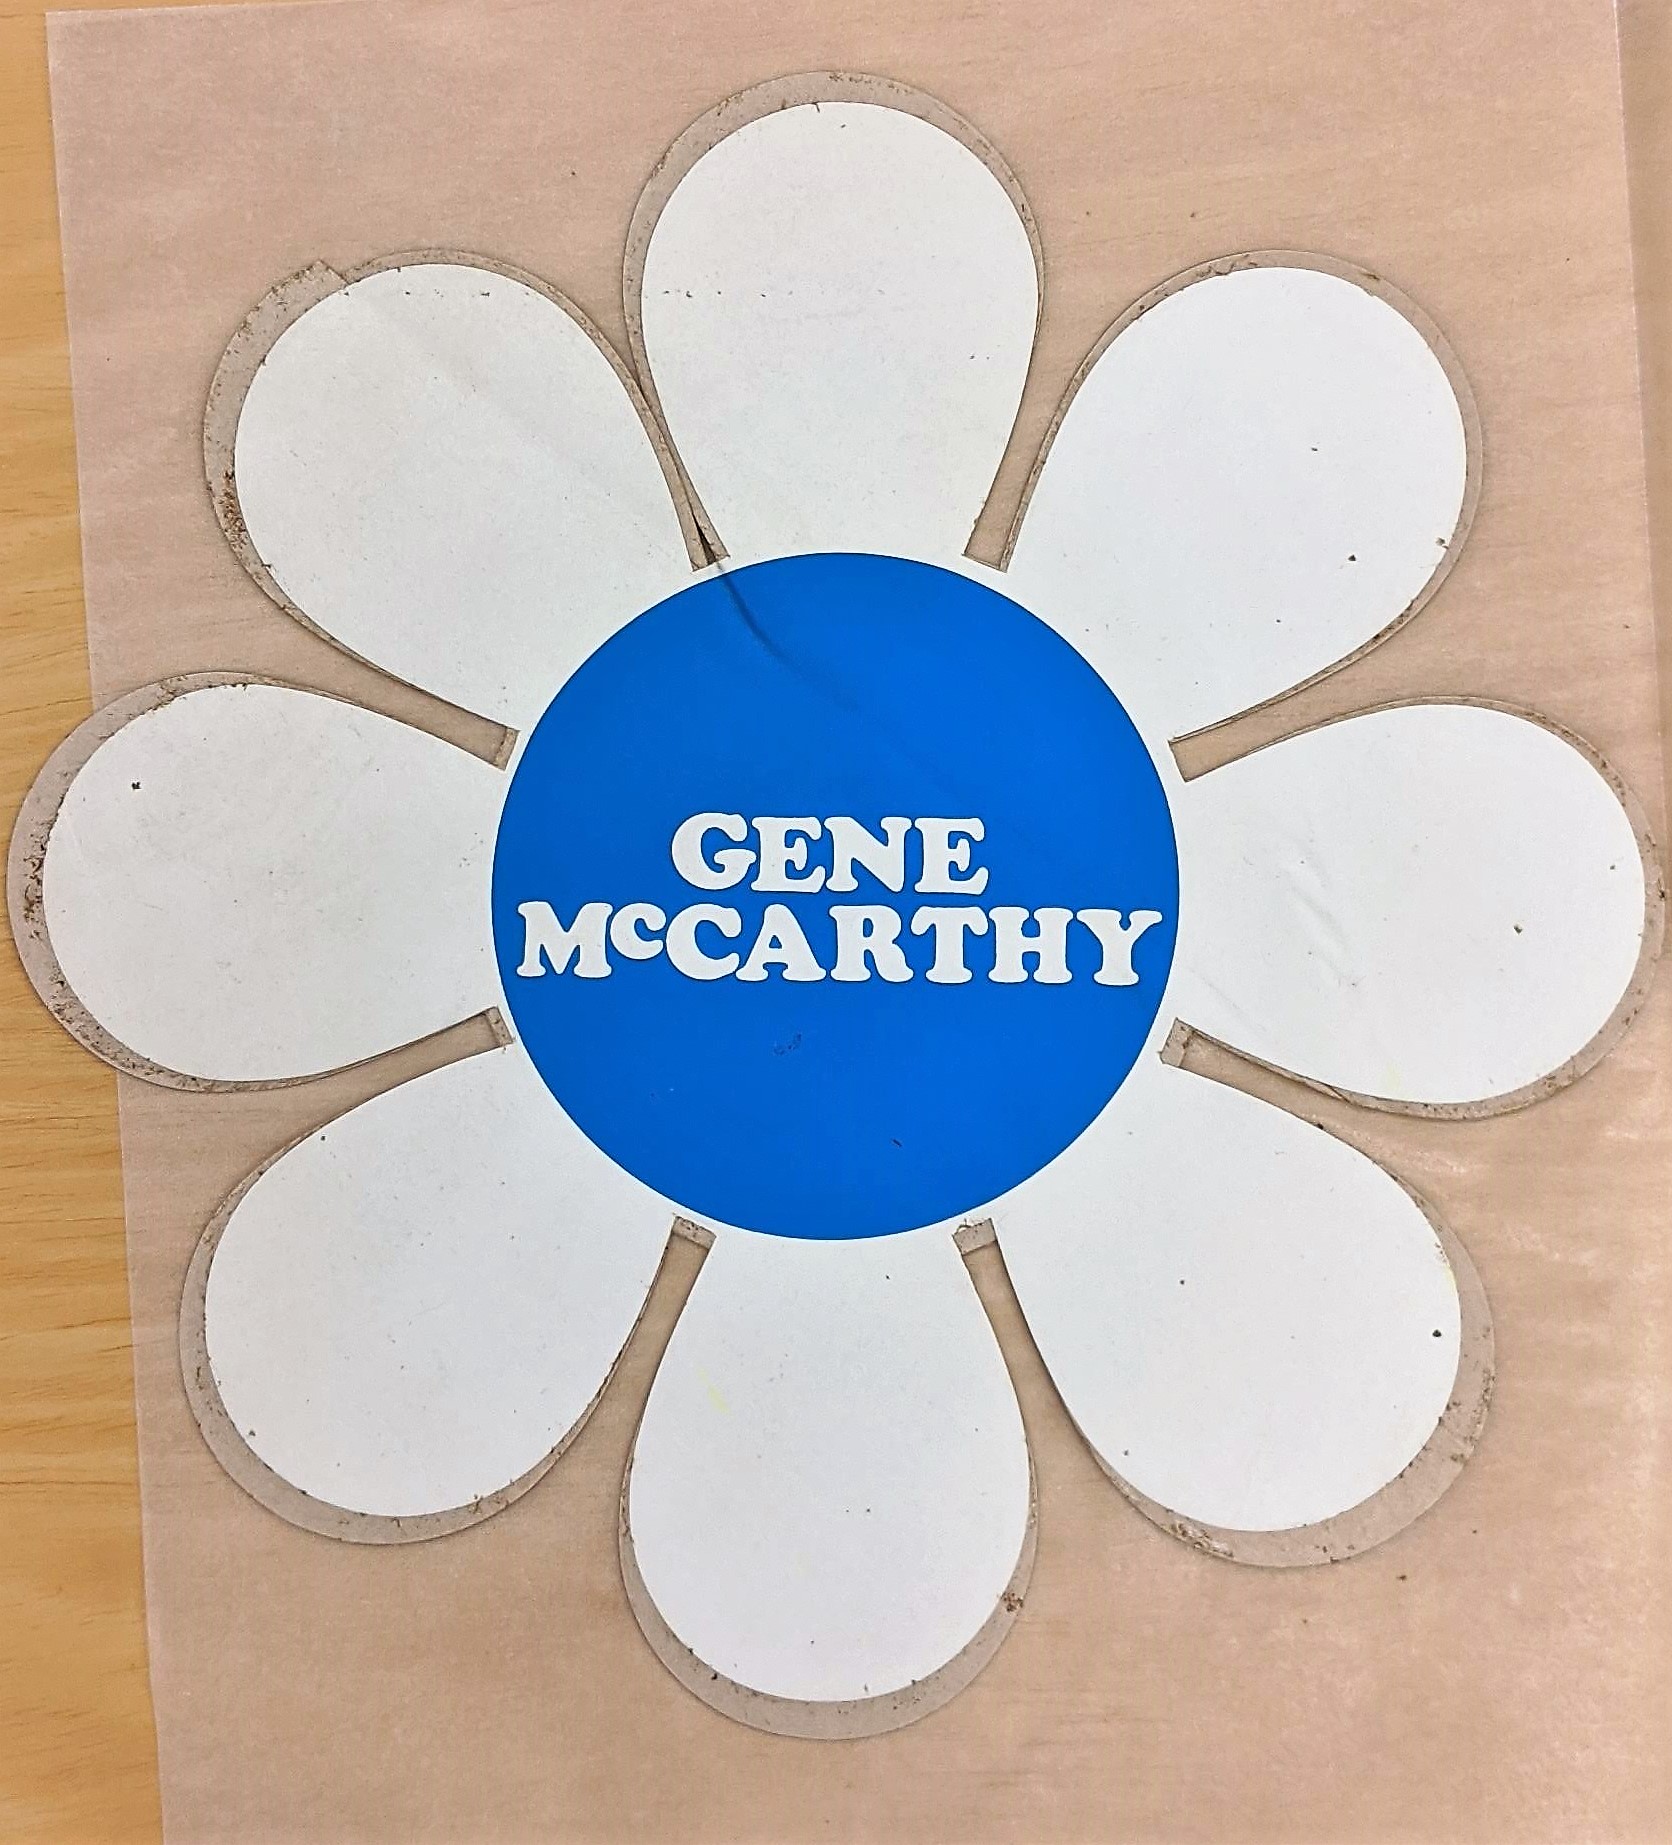 Creator unknown, “[Eugene] Gene McCarthy” flower bumper sticker, 1968, from the Jerome O. Herlihy political campaign ephemera collection